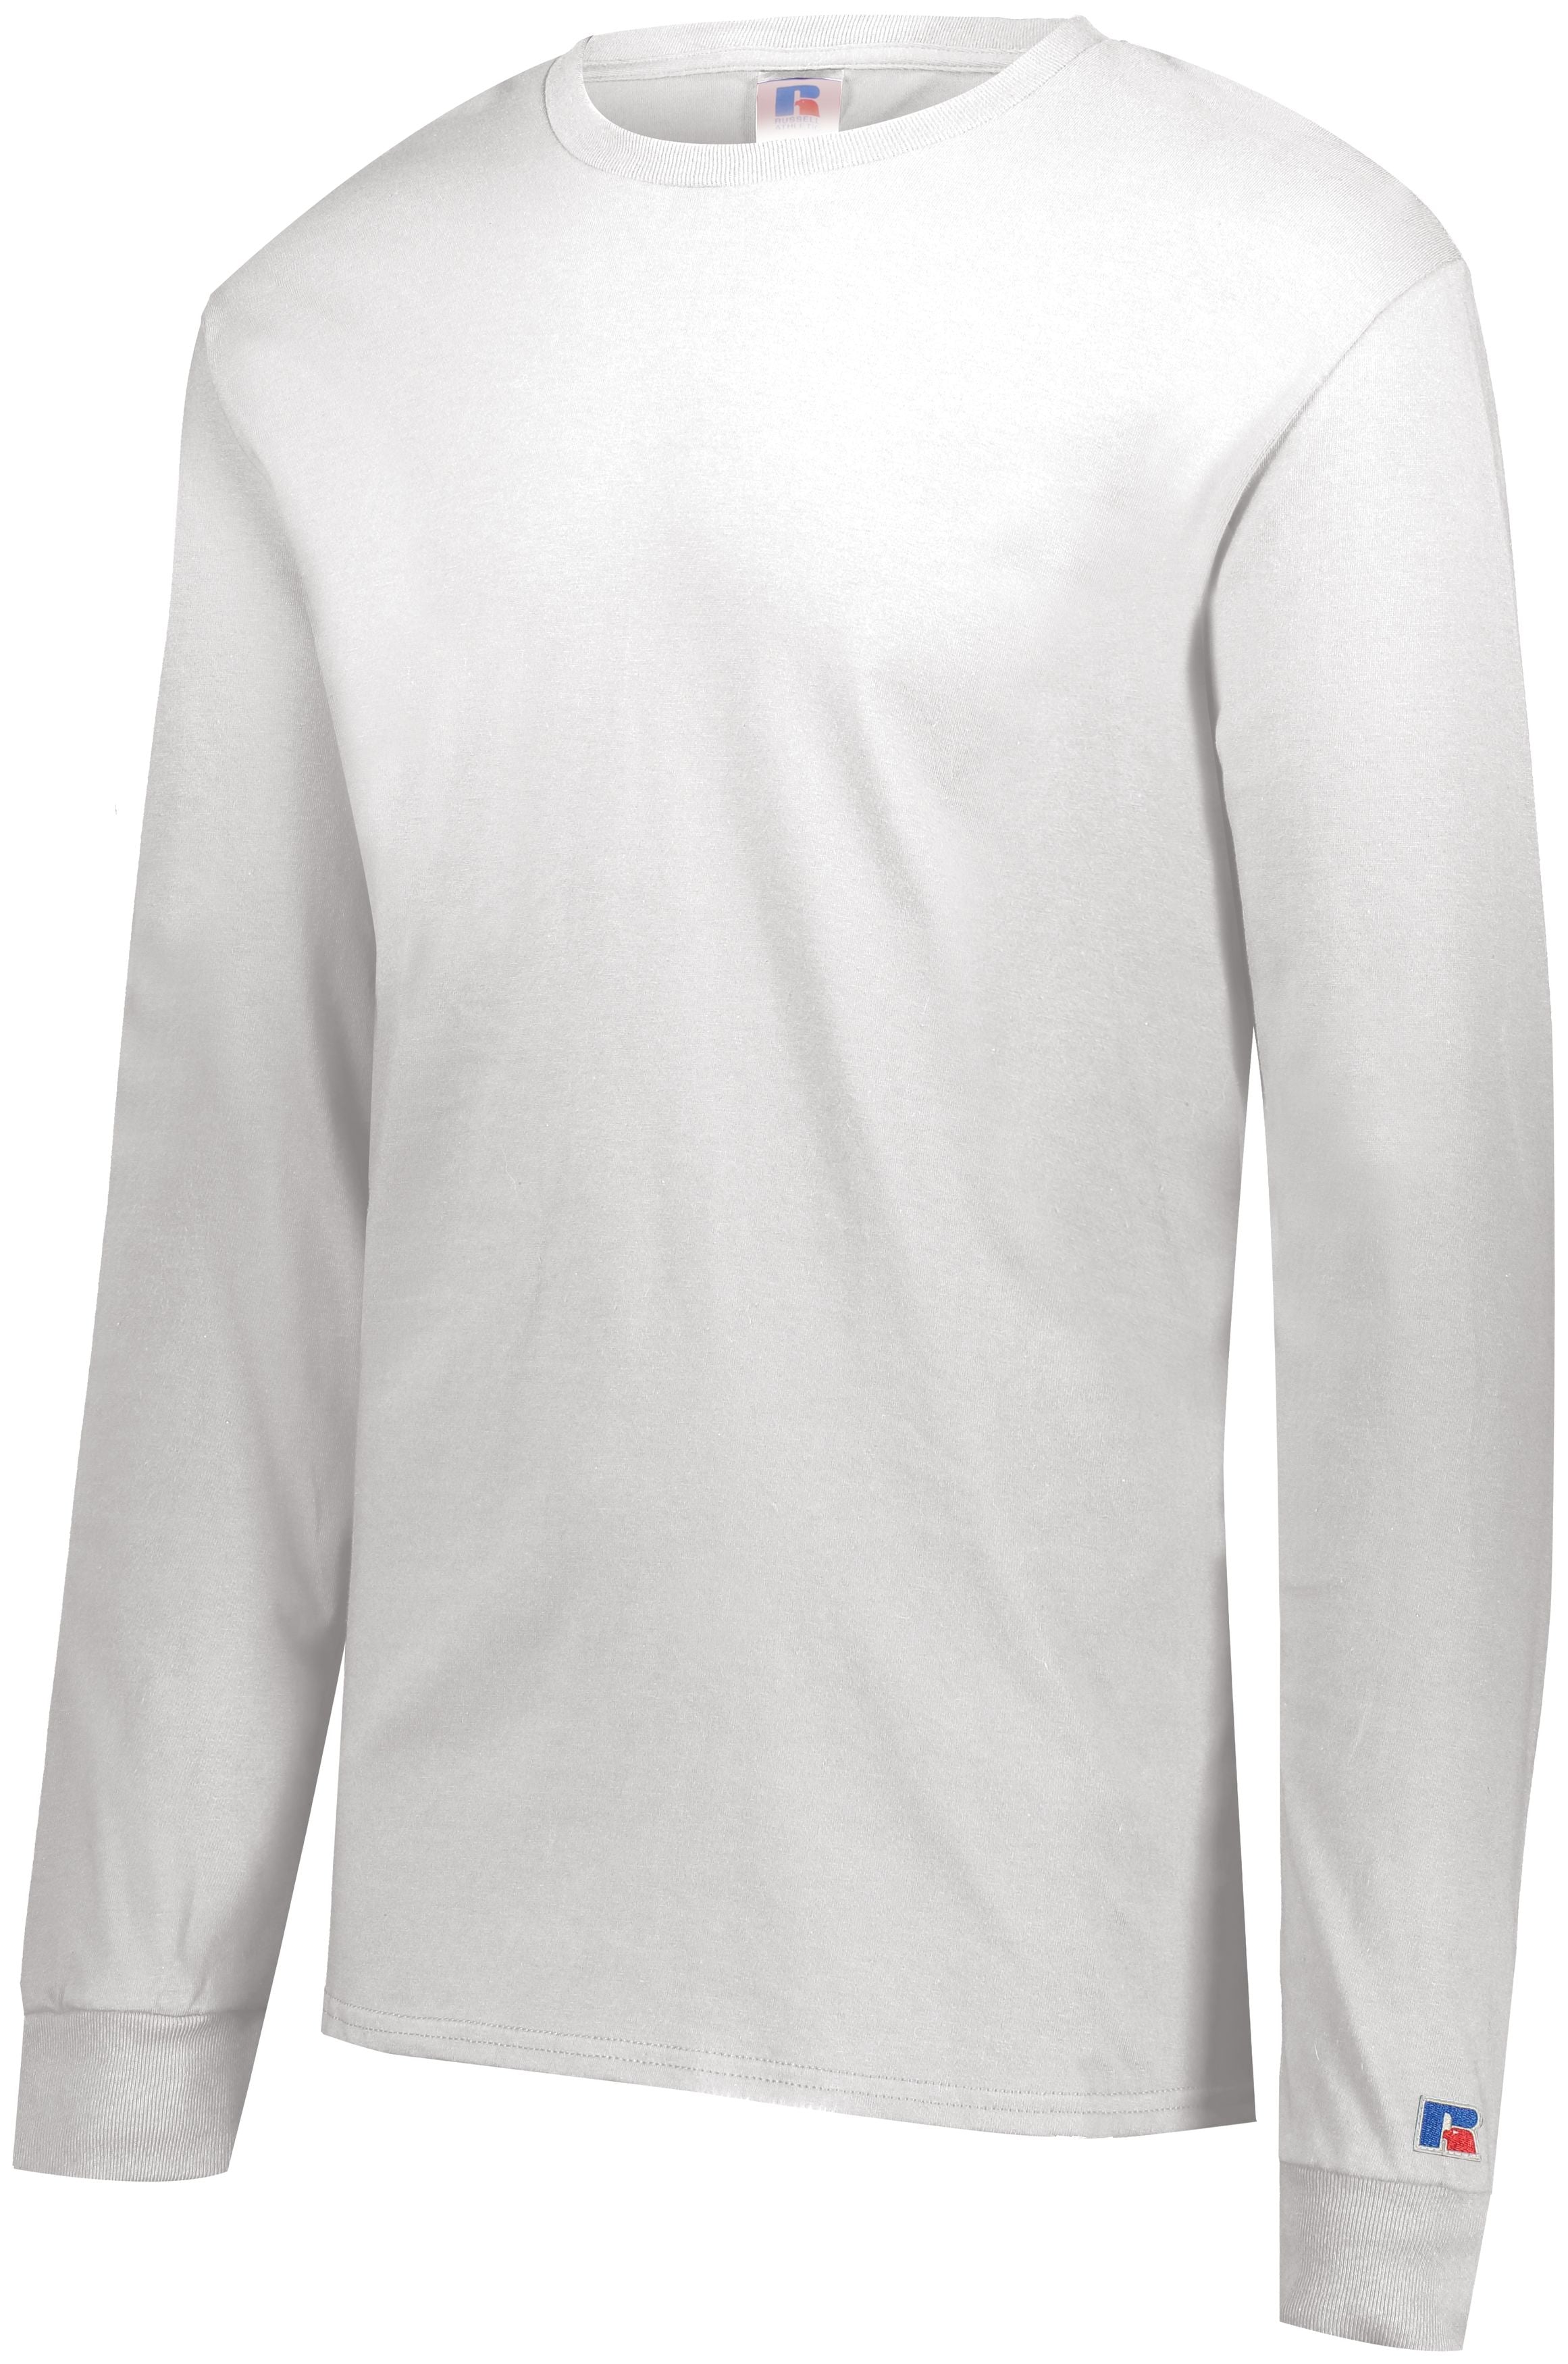 Russell Athletic Cotton Classic Long Sleeve Tee